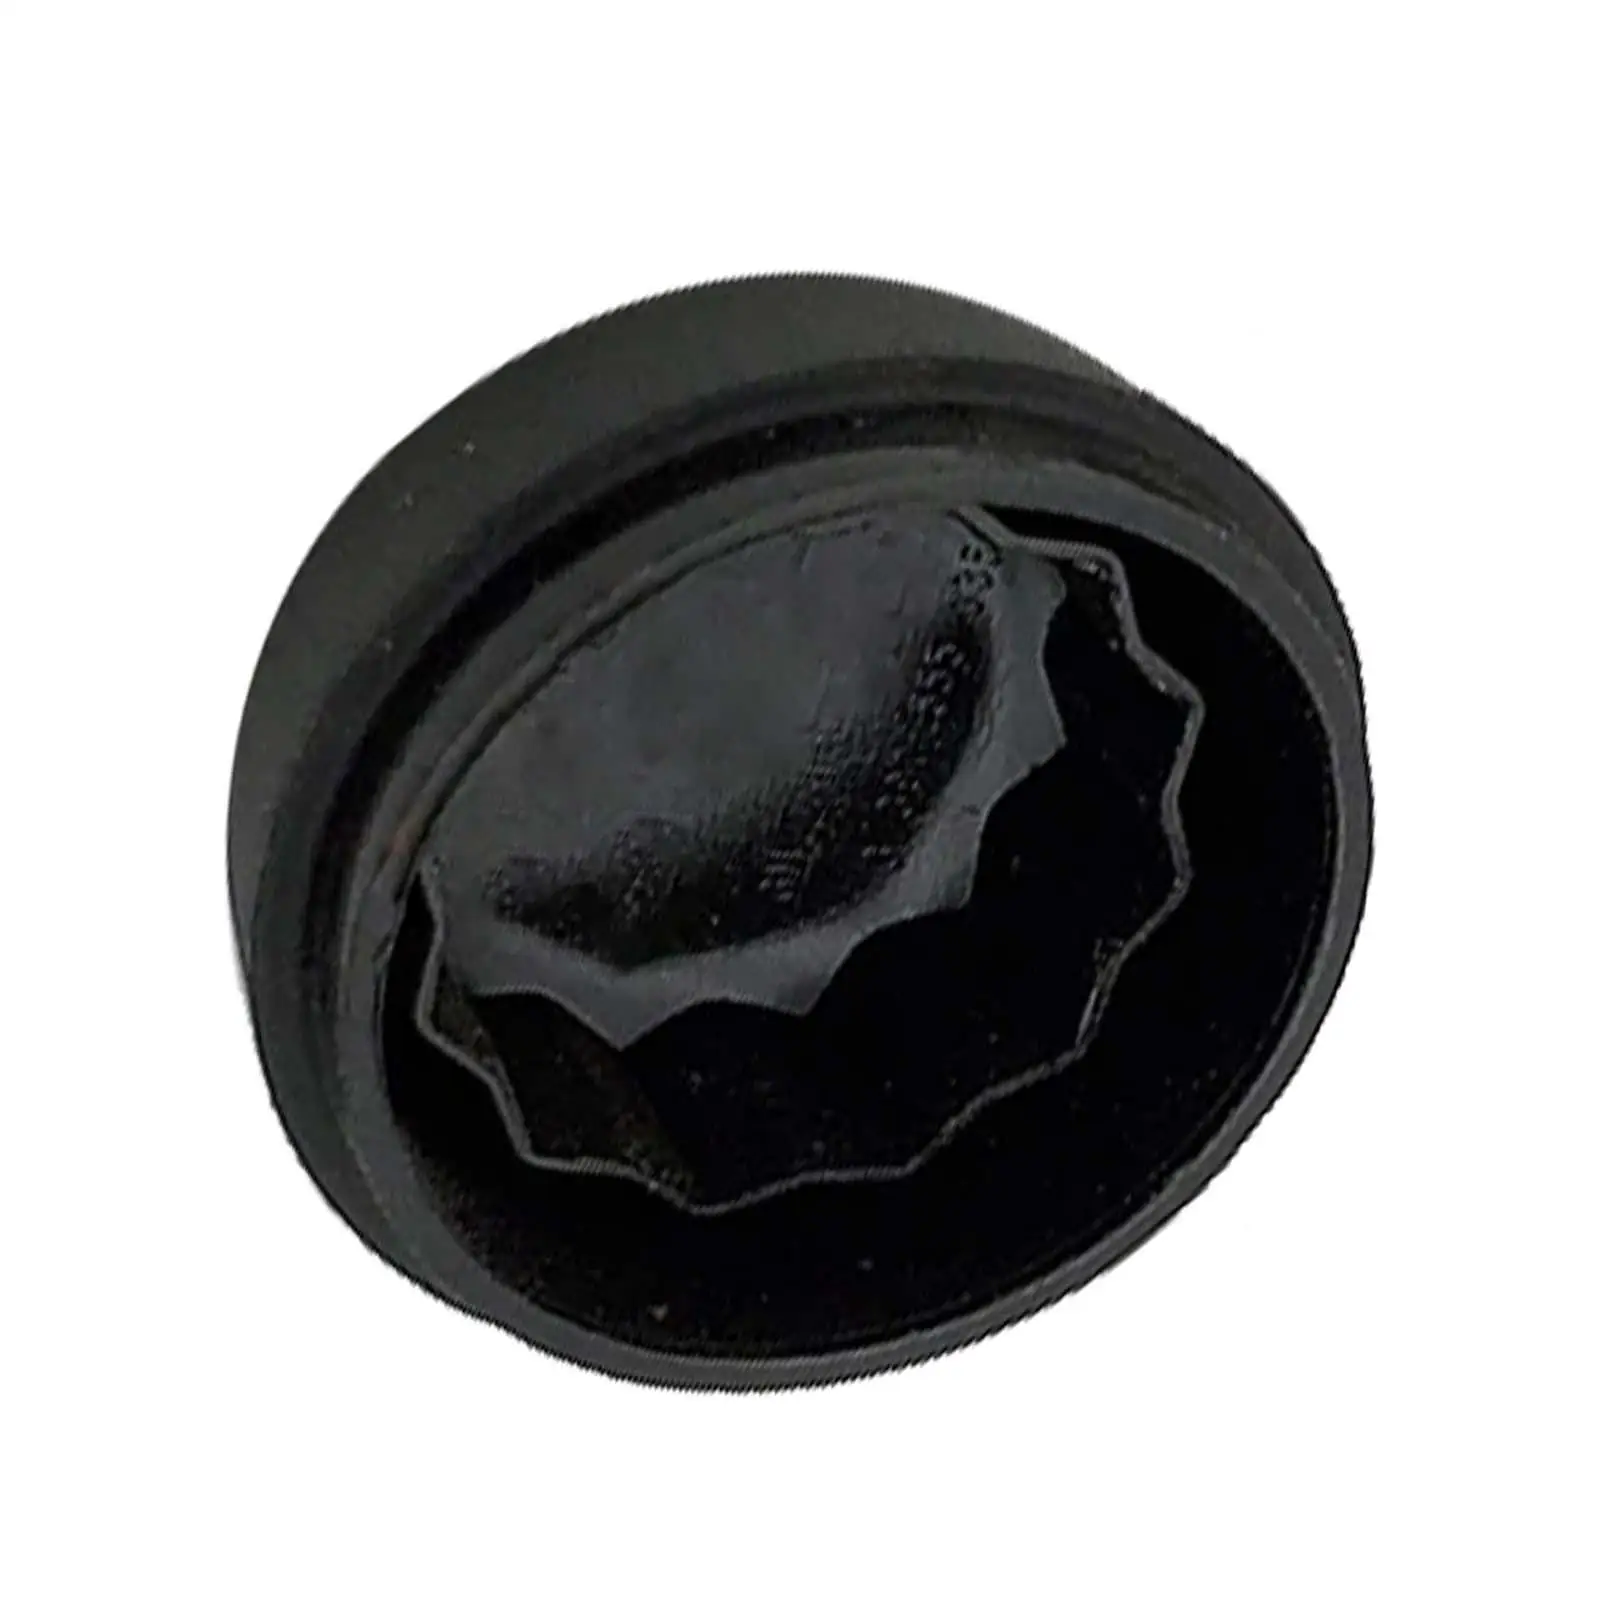 Car Wiper Nut Cap Repair Parts 1106610-00-a Replacement for Tesla Model 3 Professional Car Accessory Easy Installation